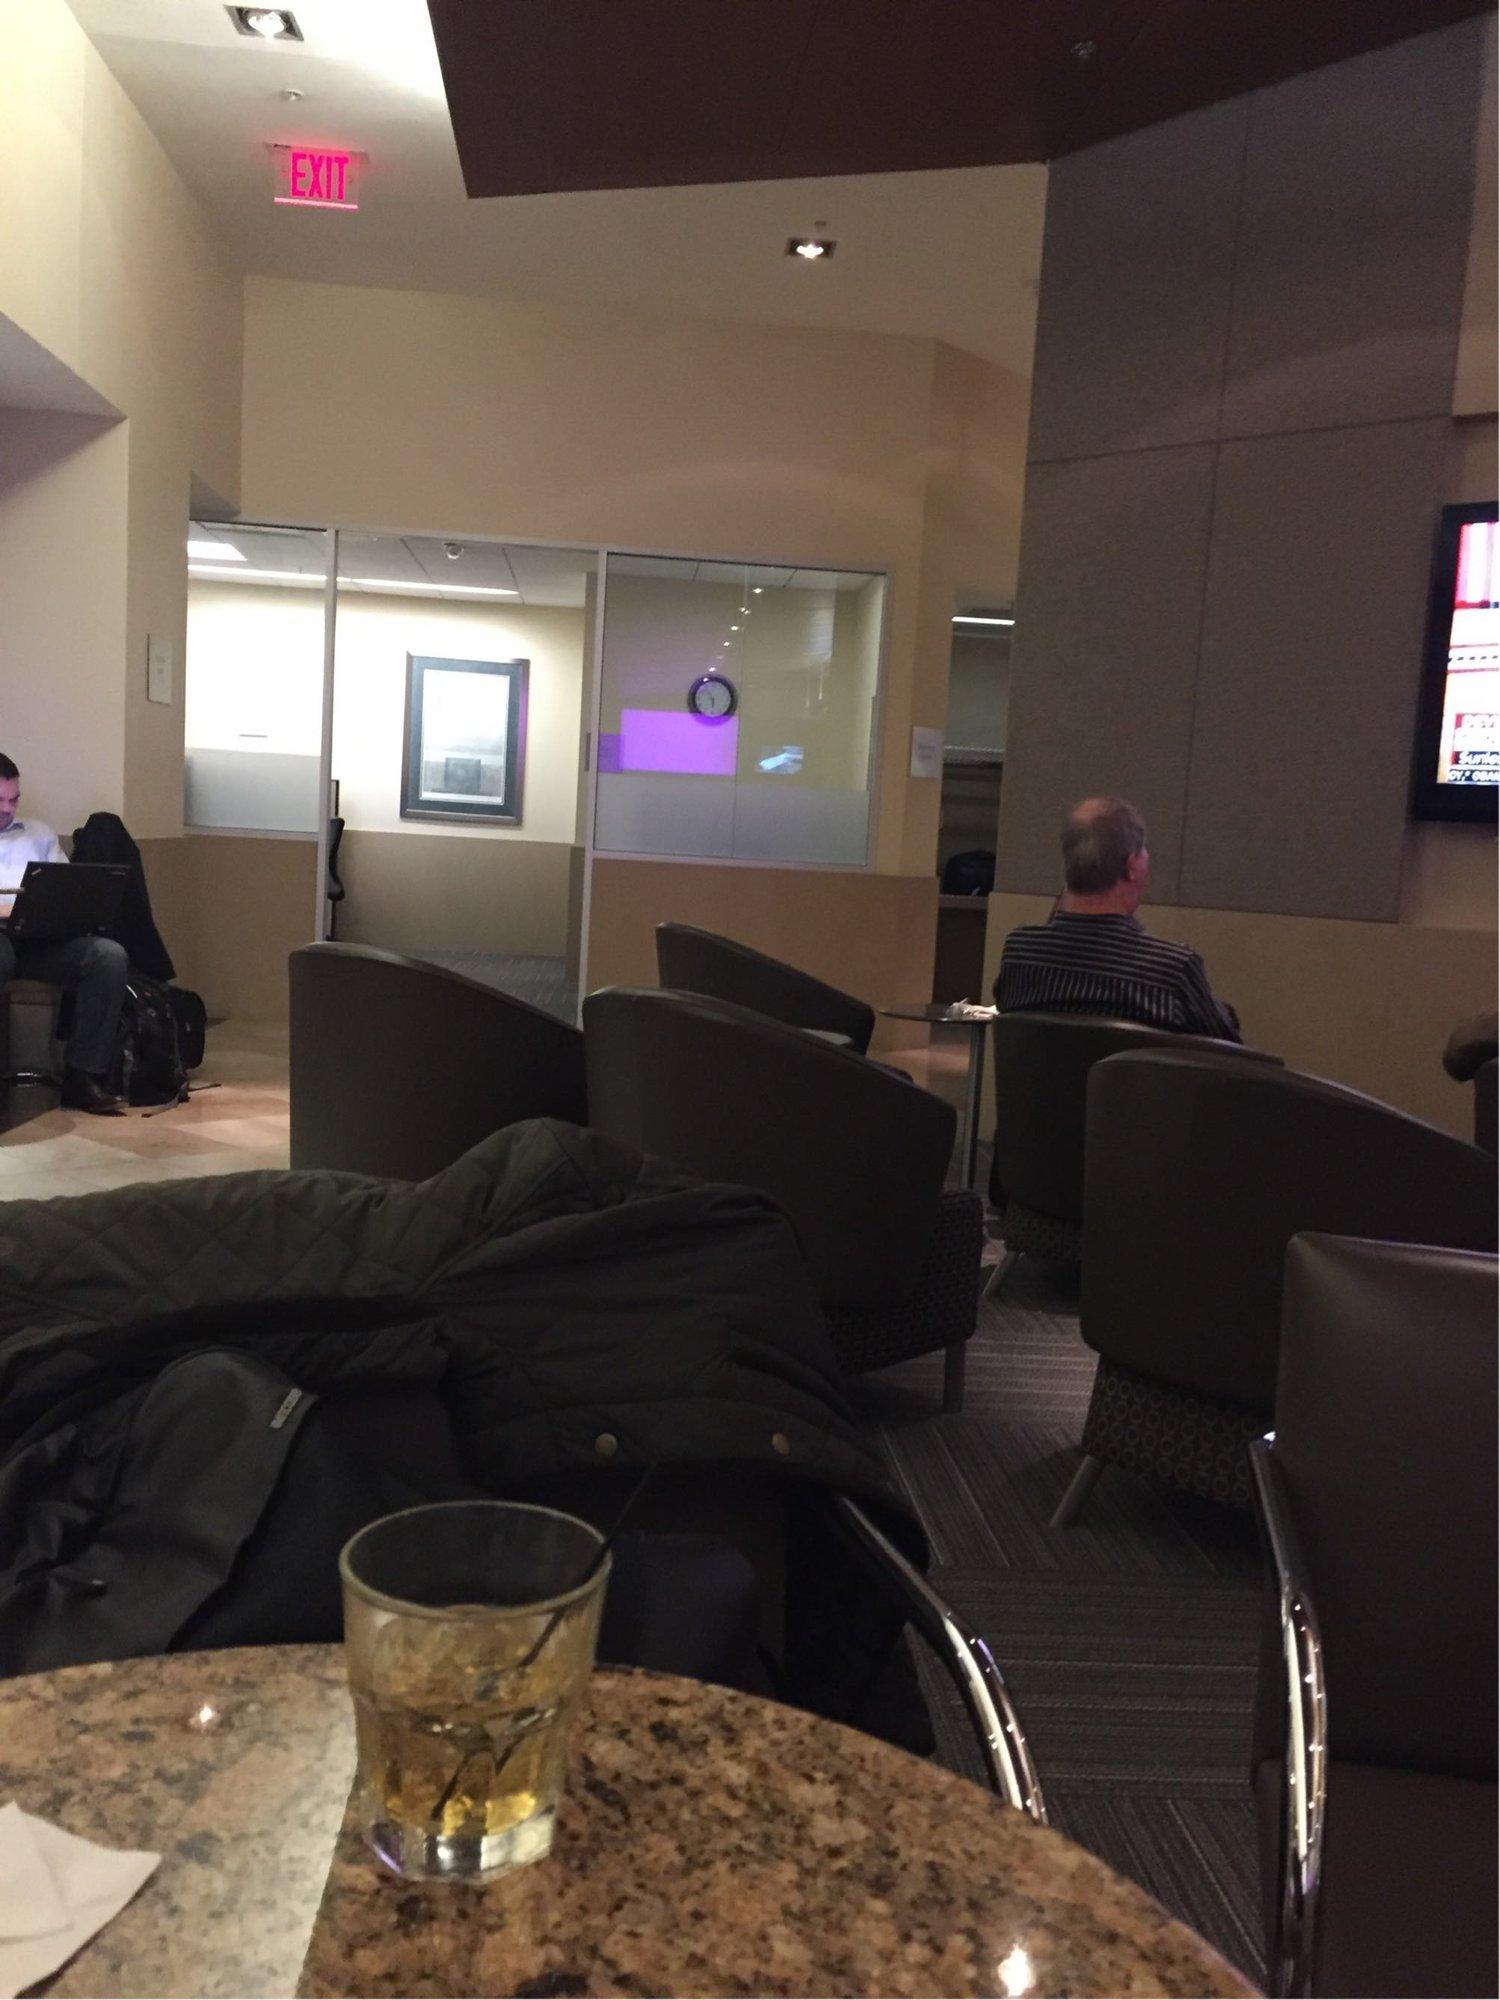 American Airlines Admirals Club image 26 of 31